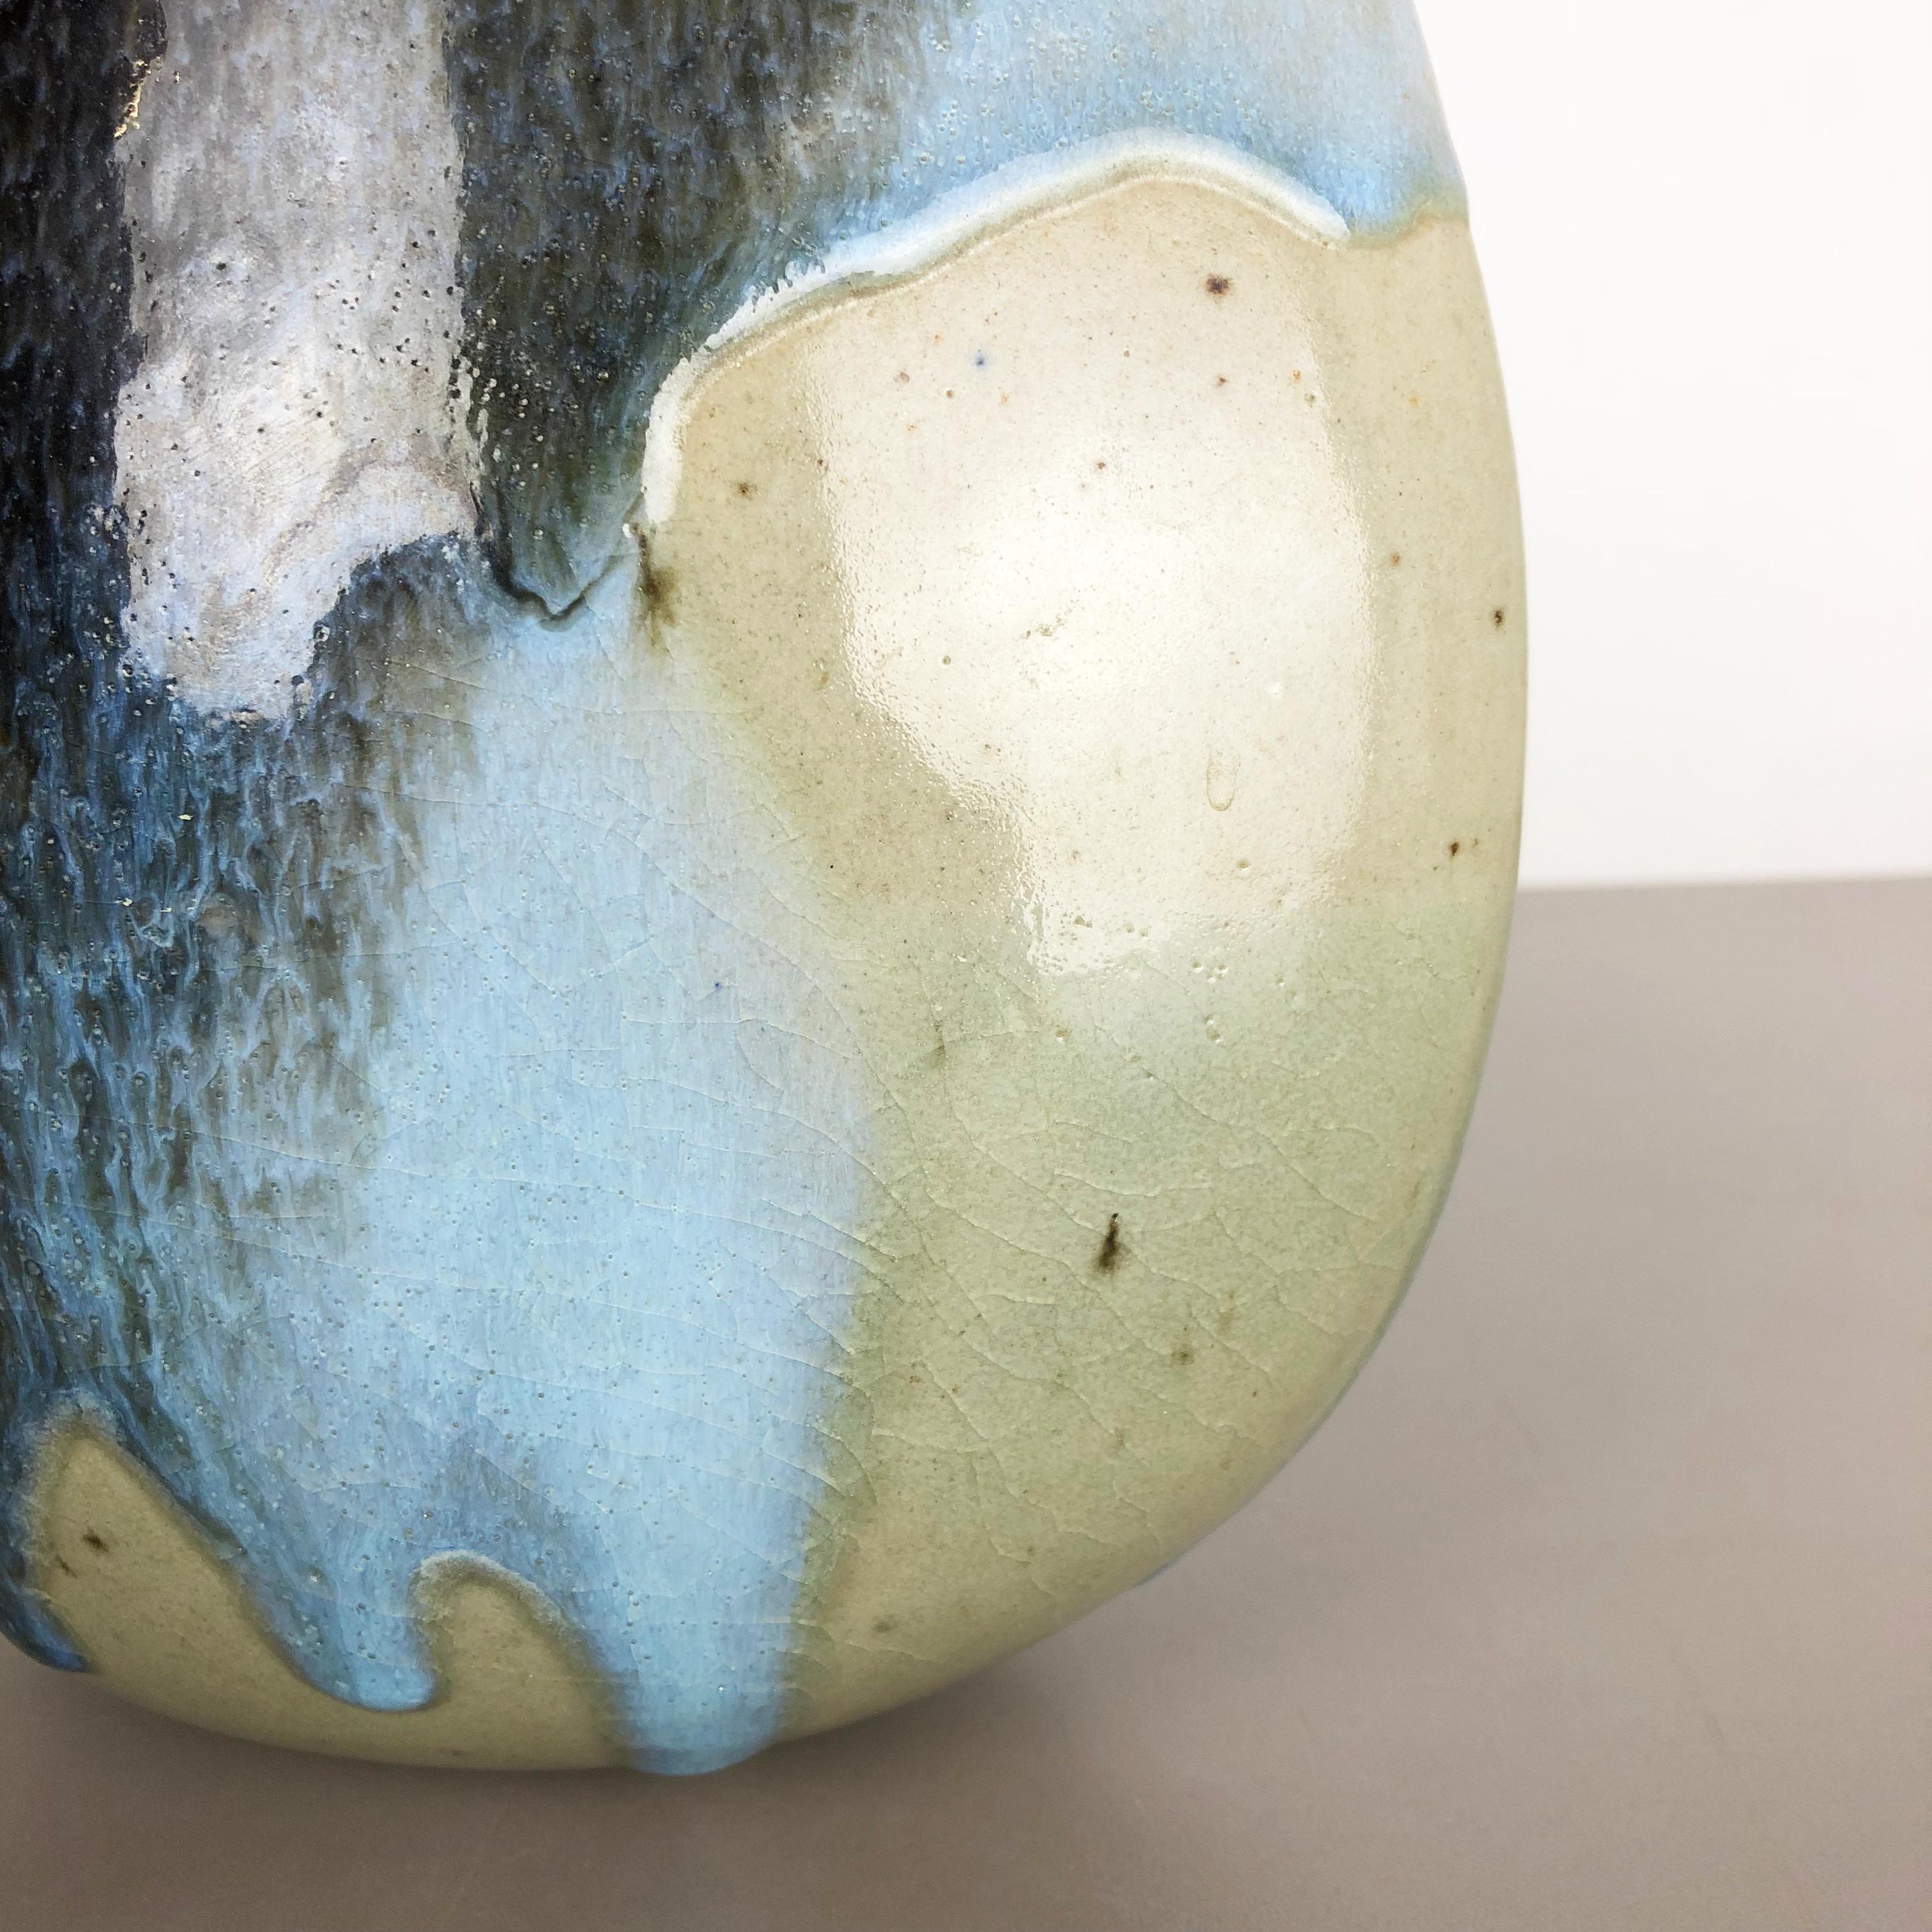 Abstract Ceramic Studio Stoneware Vase by Gotlind Weigel, Germany, 1960s For Sale 5